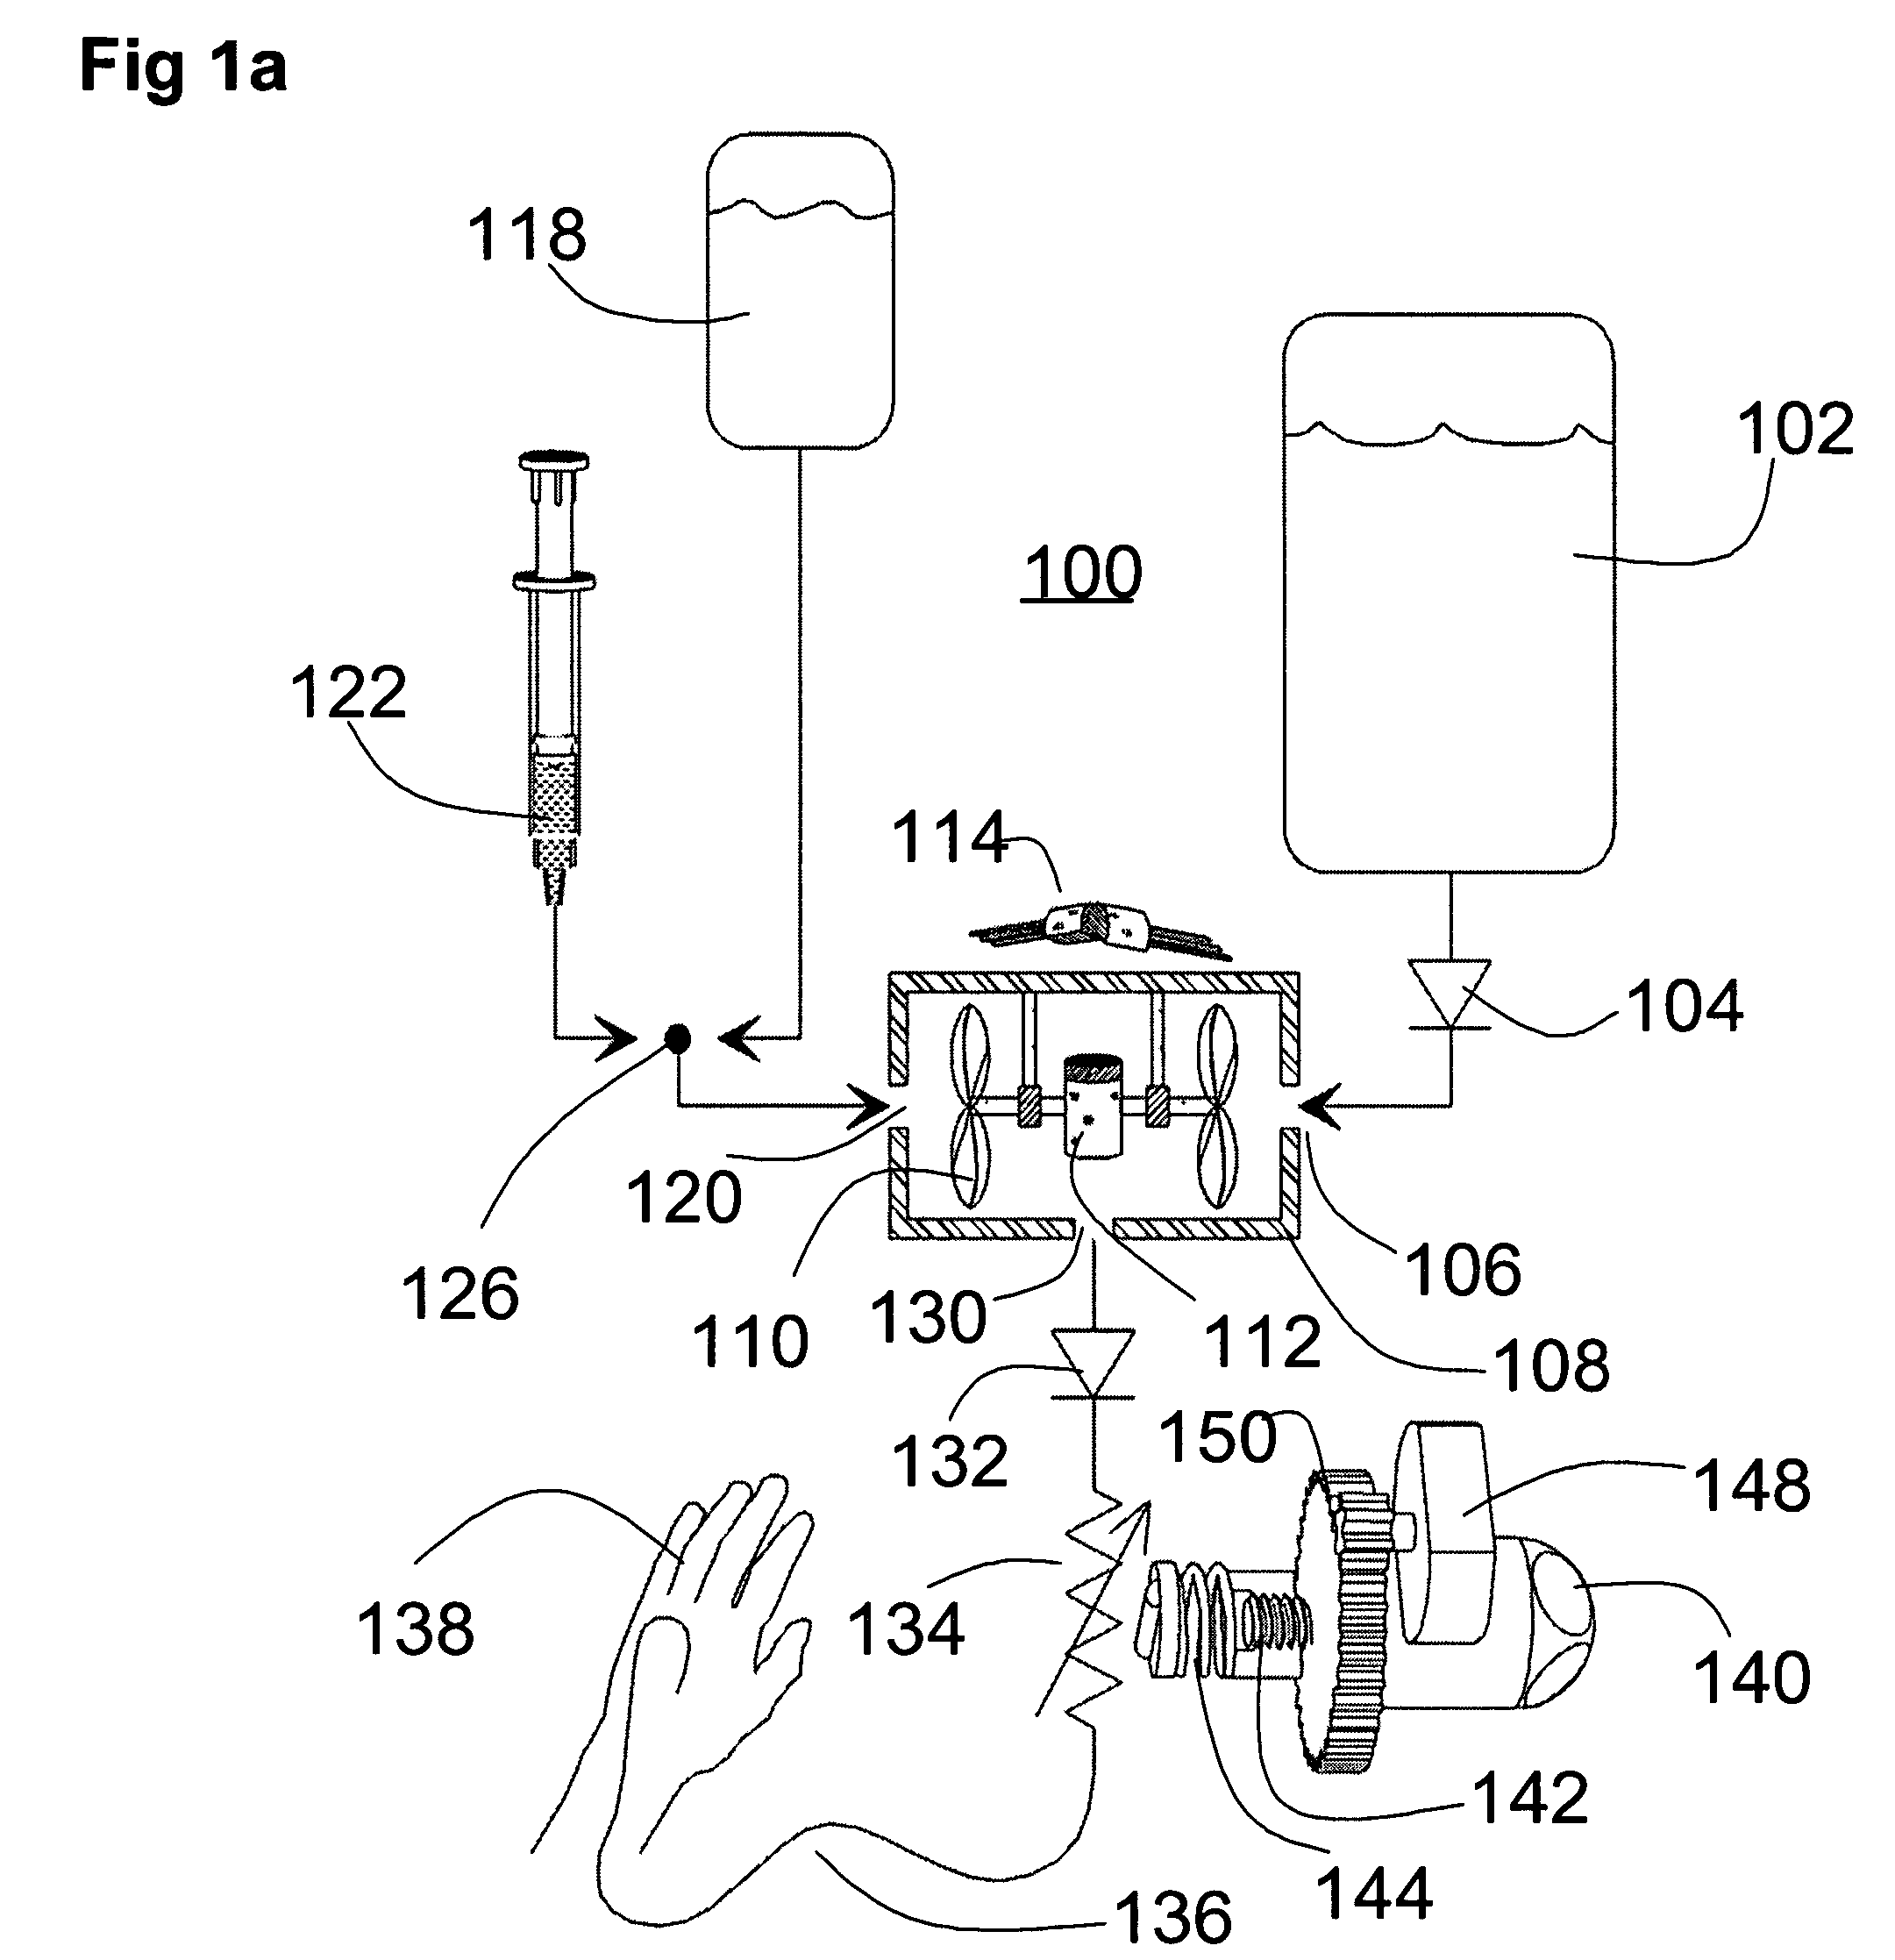 Automated fluid flow control system